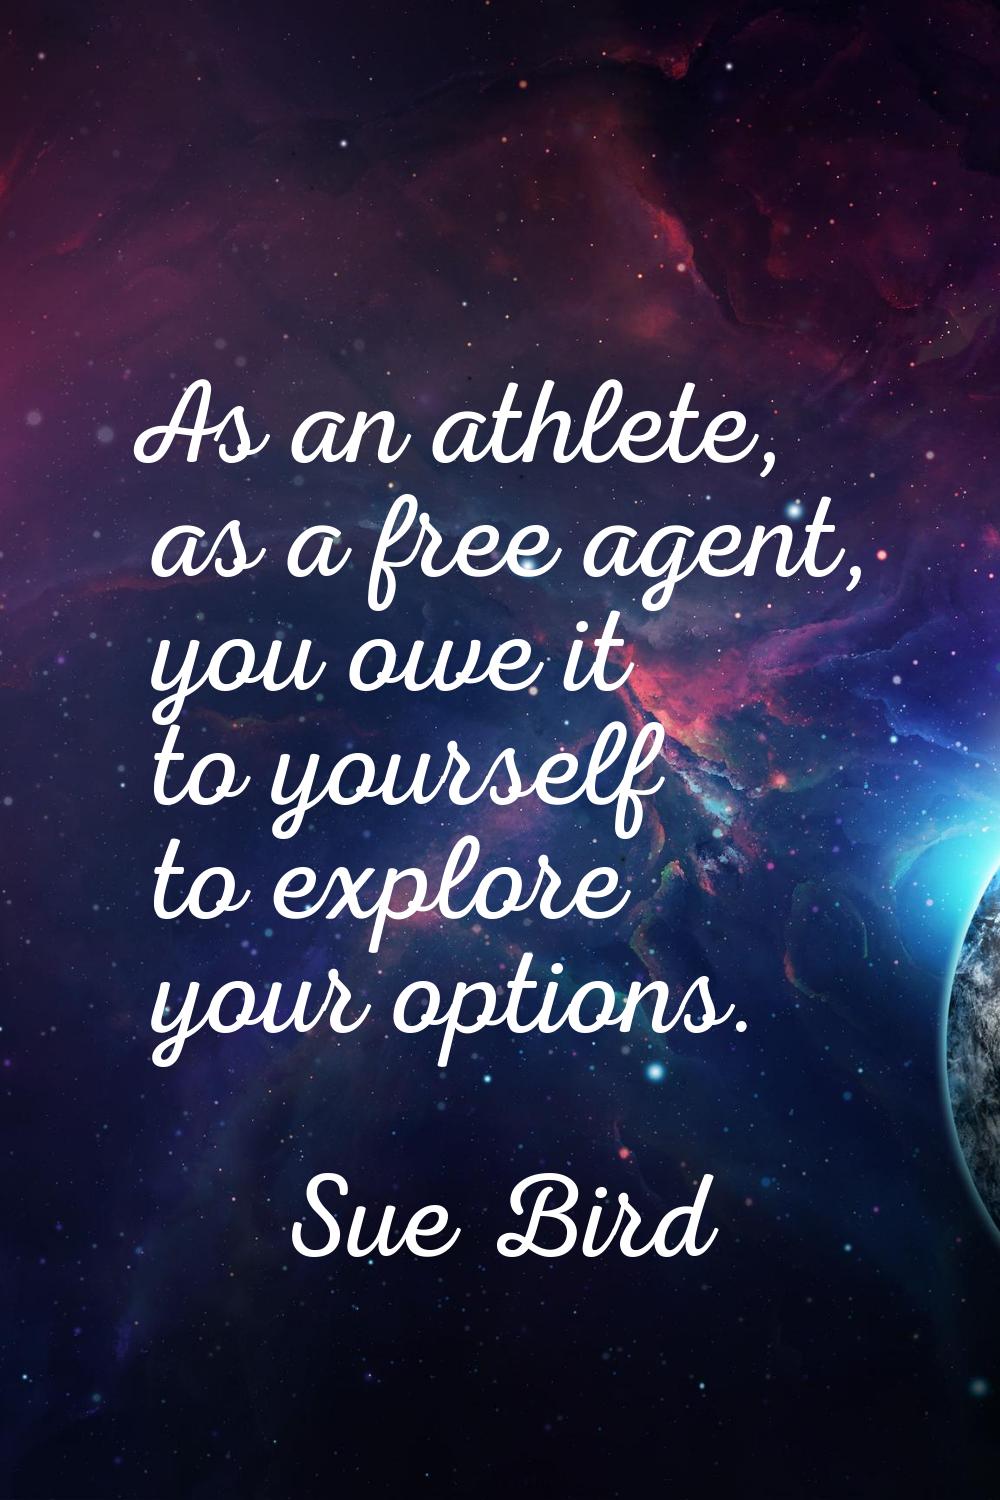 As an athlete, as a free agent, you owe it to yourself to explore your options.